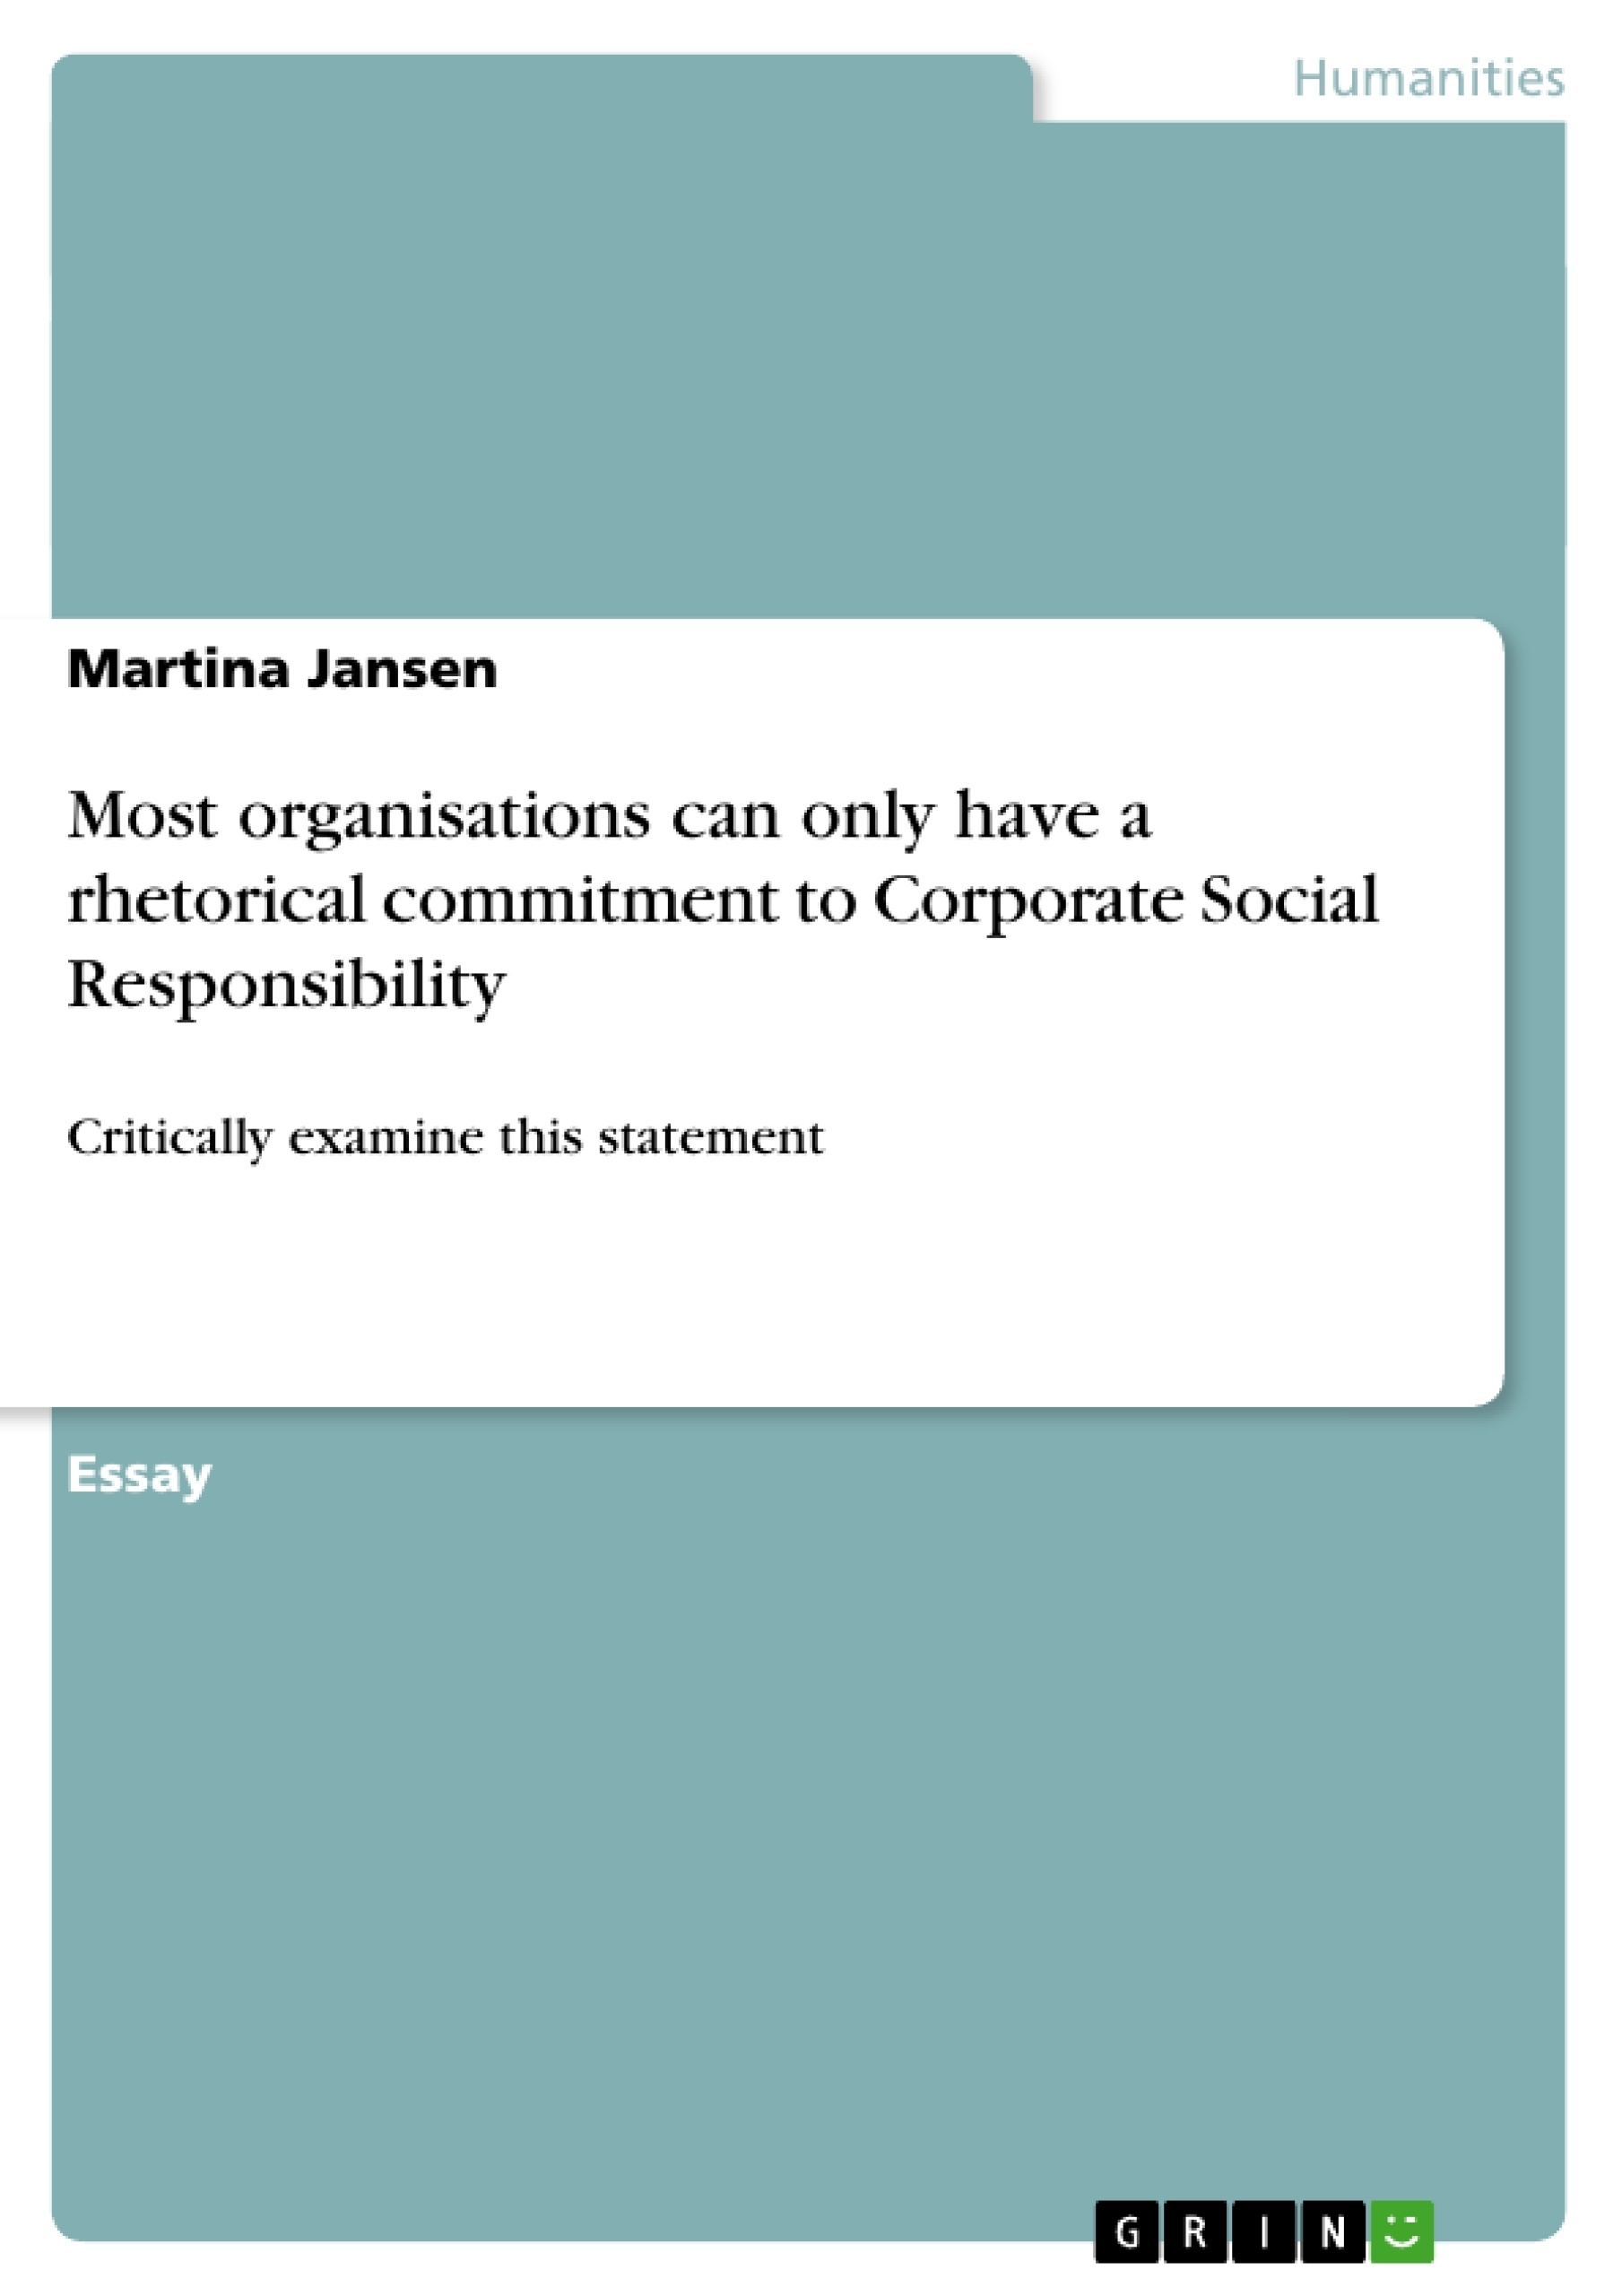 Título: Most organisations can only have a rhetorical commitment to Corporate Social Responsibility